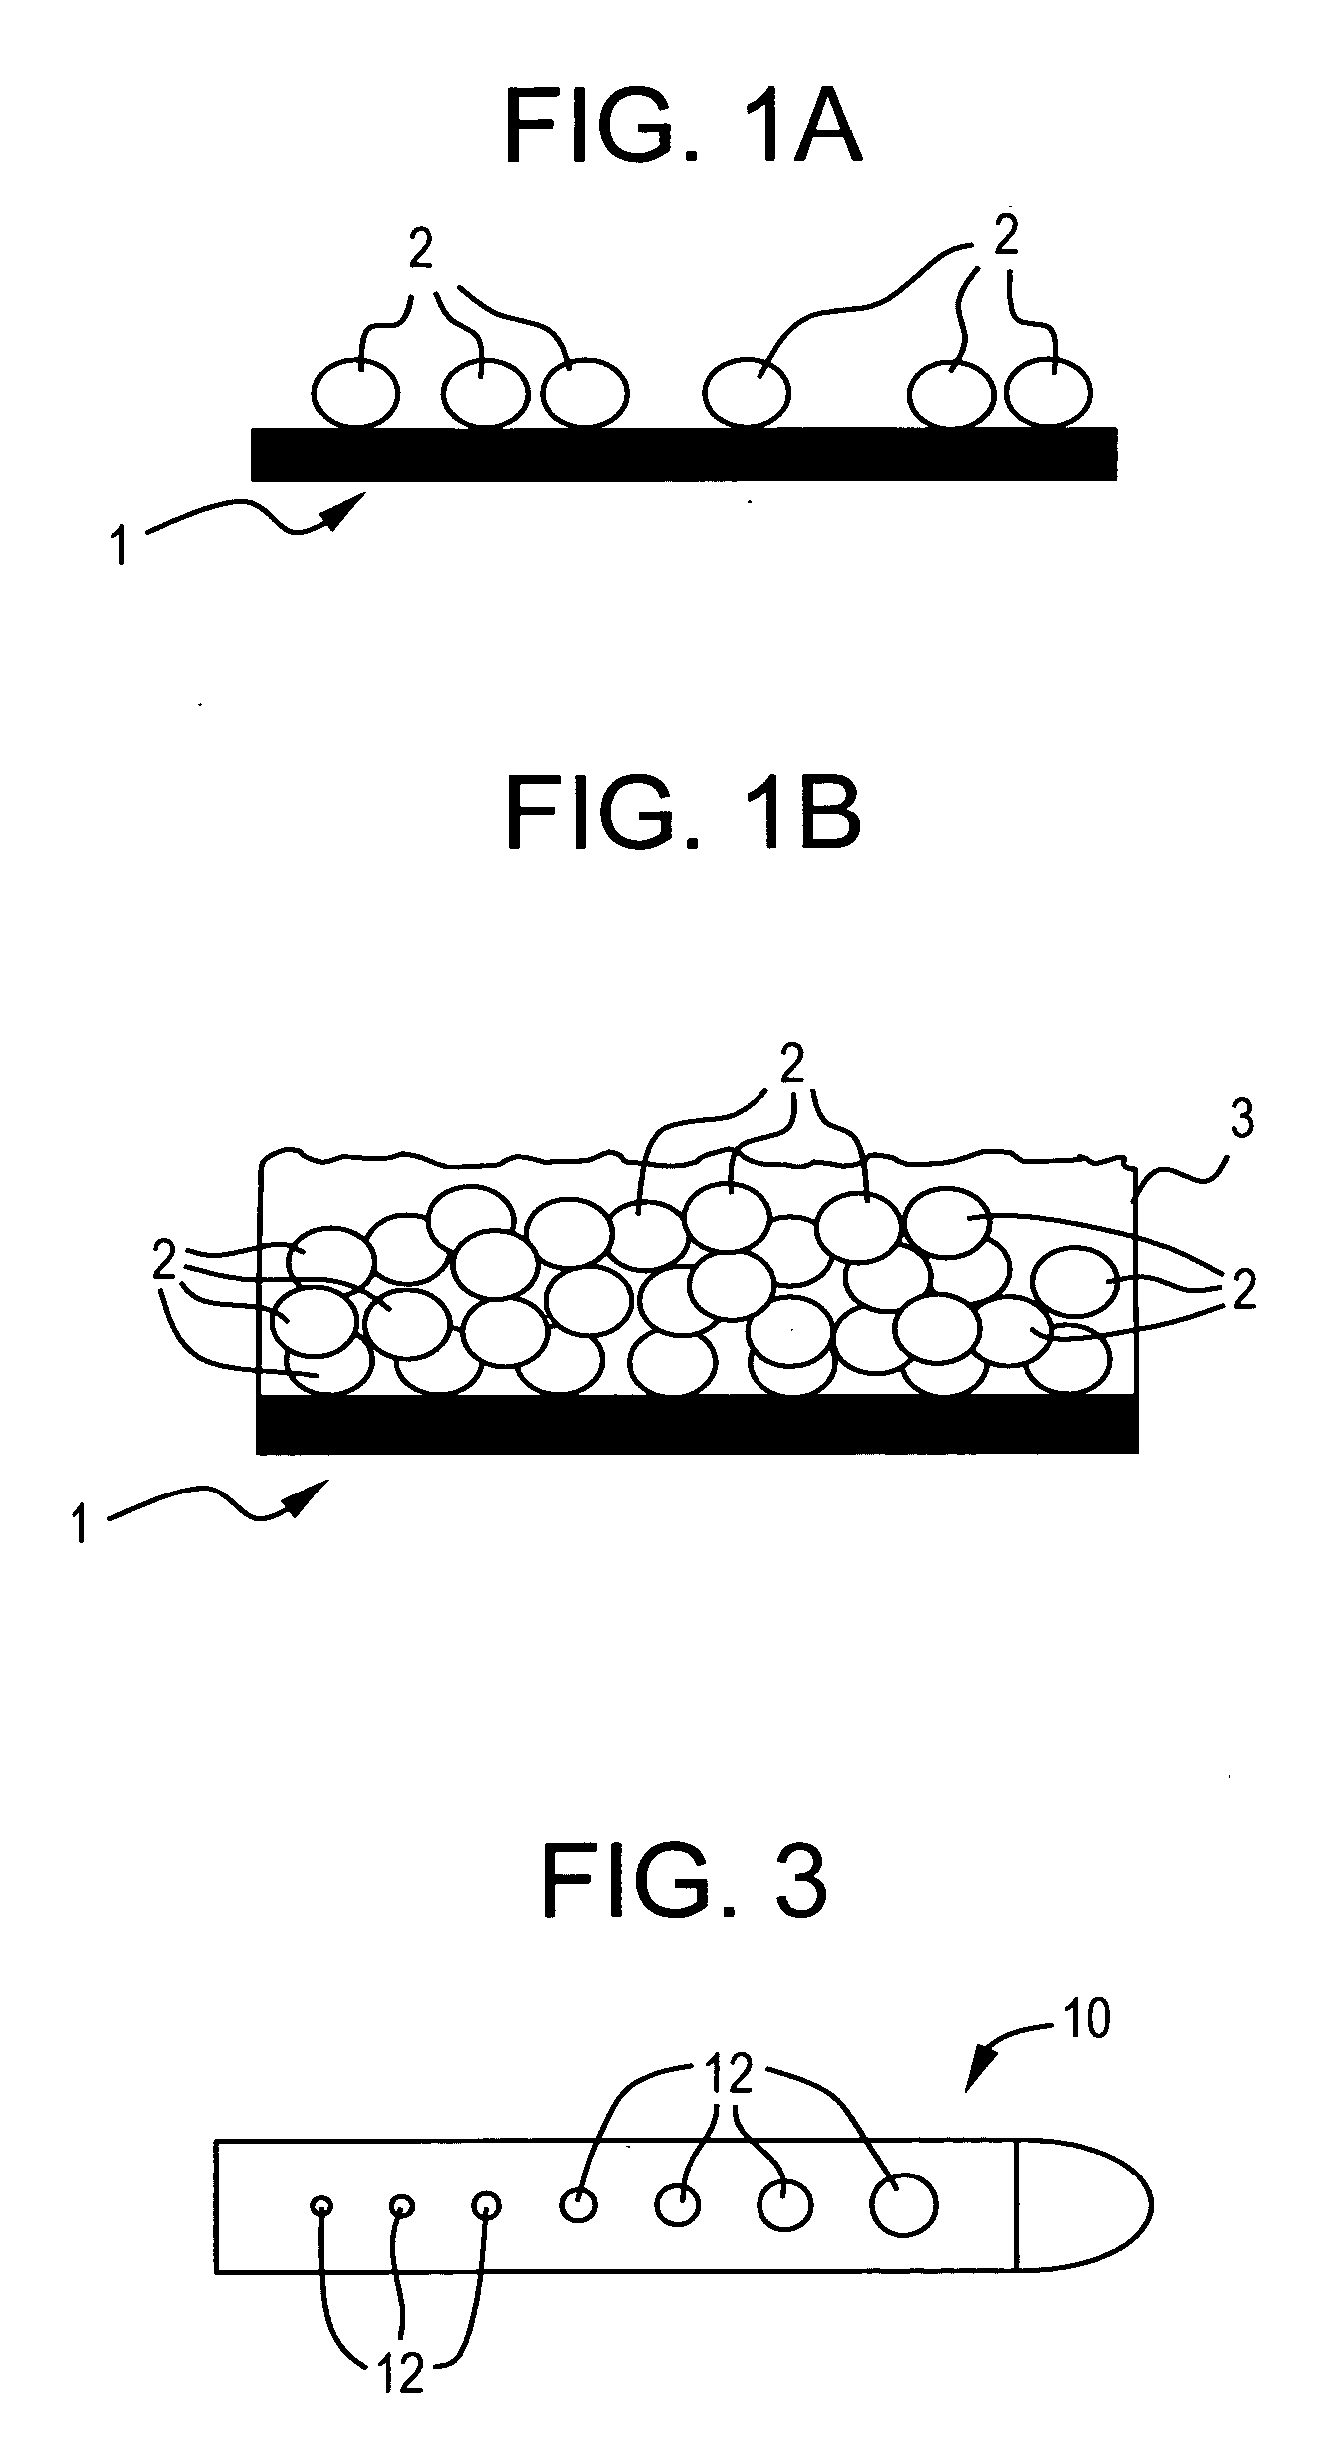 Fluid management flow implants of improved occlusion resistance